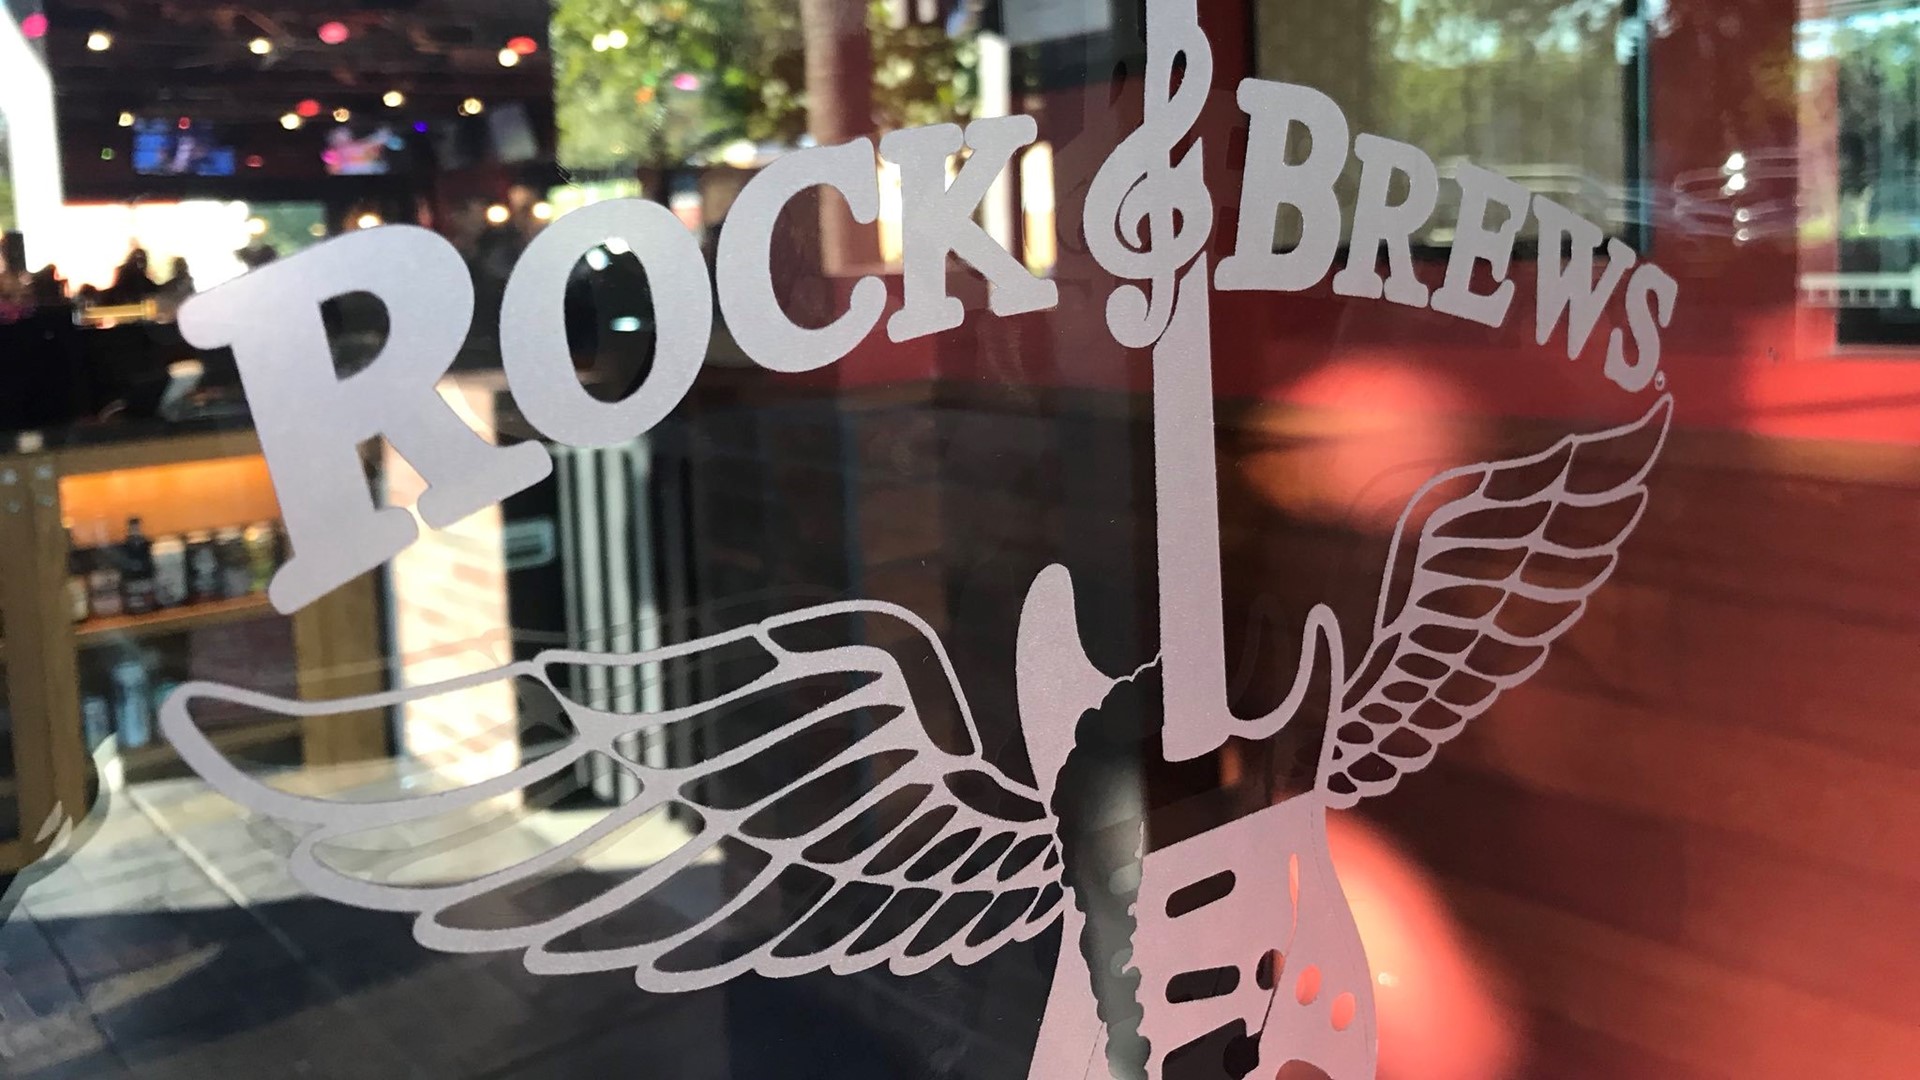 The Rock & Brews restaurant in Vacaville was scheduled to shut down on Sunday night but now the restaurant is getting a second chance. On Sunday, the restaurant's owners announced they've "delayed the closure" while the business is being sold.